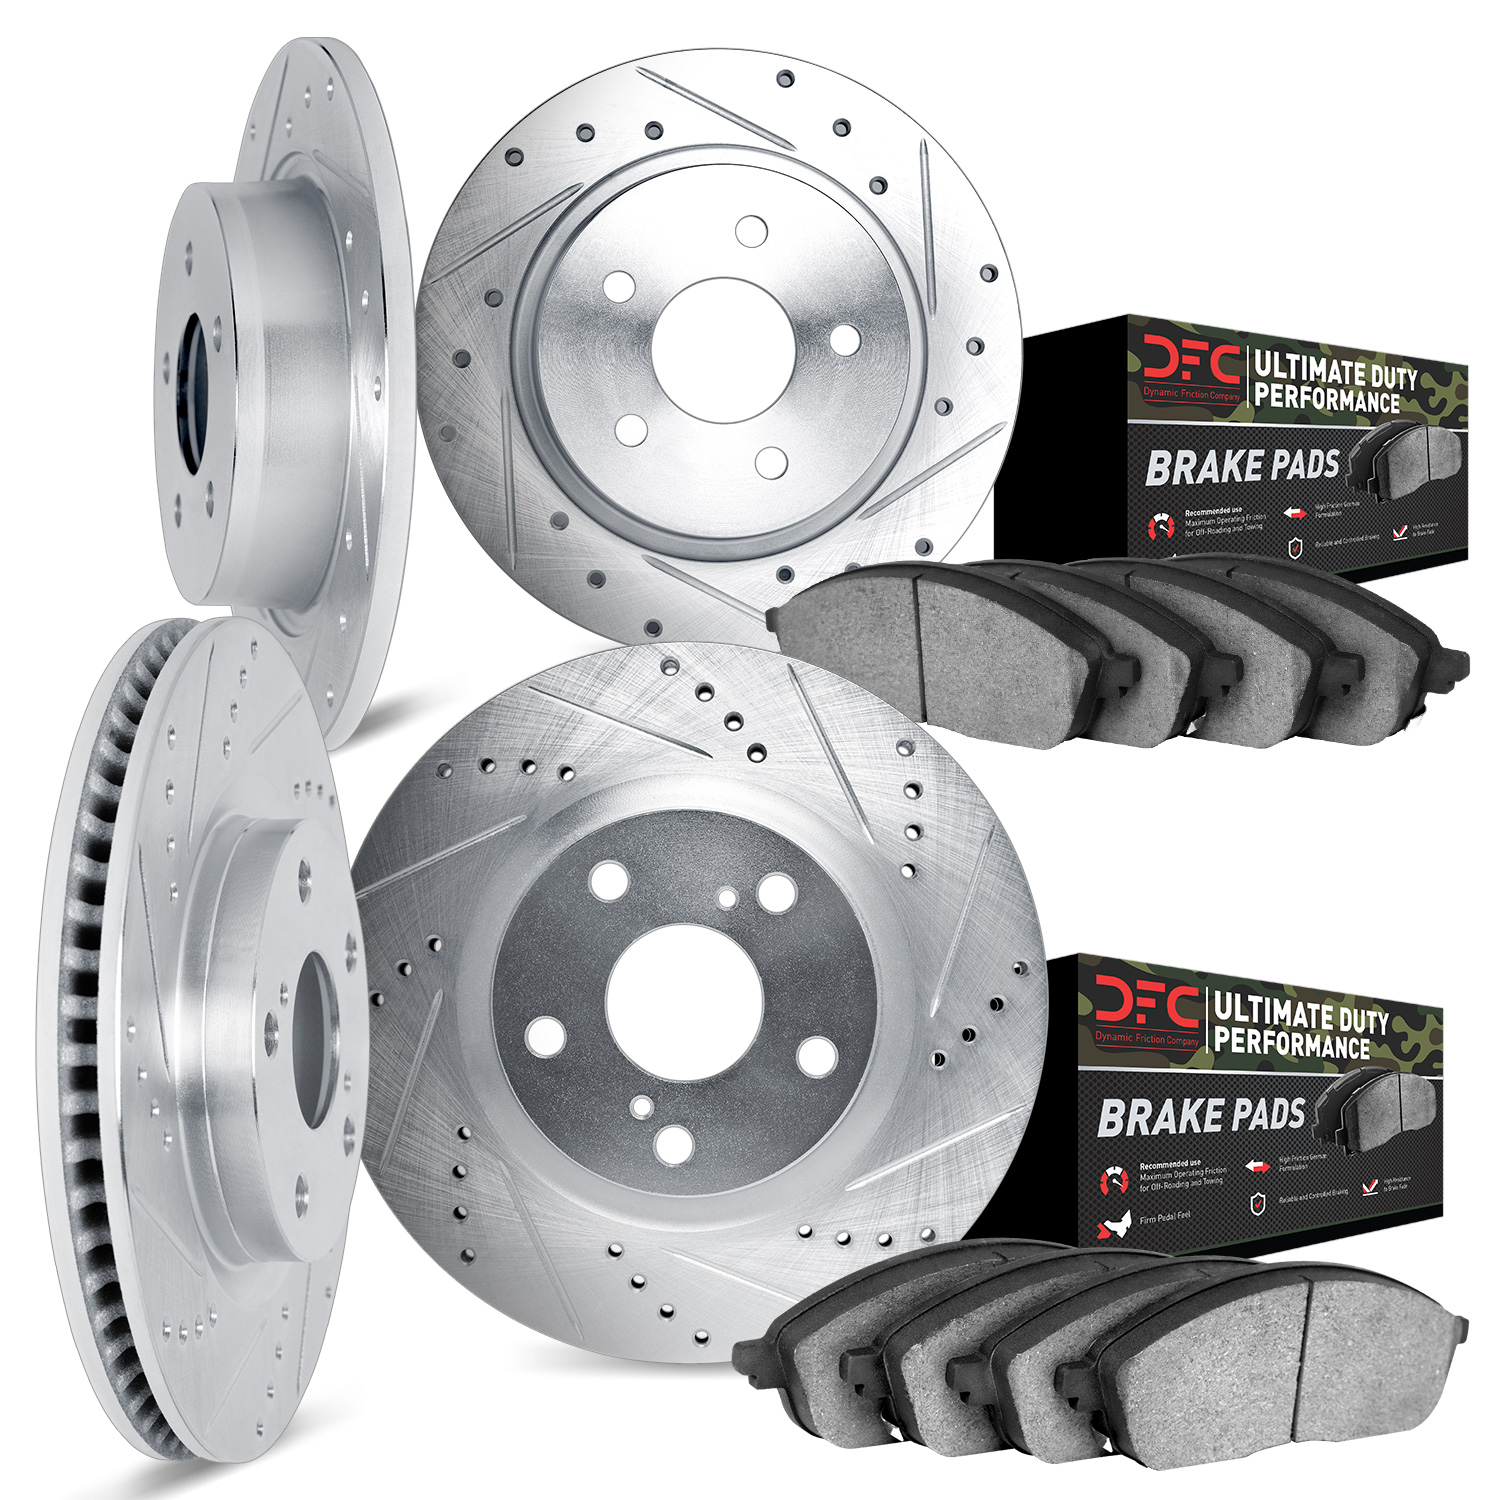 7404-54003 Drilled/Slotted Brake Rotors with Ultimate-Duty Brake Pads Kit [Silver], 2001-2002 Ford/Lincoln/Mercury/Mazda, Positi